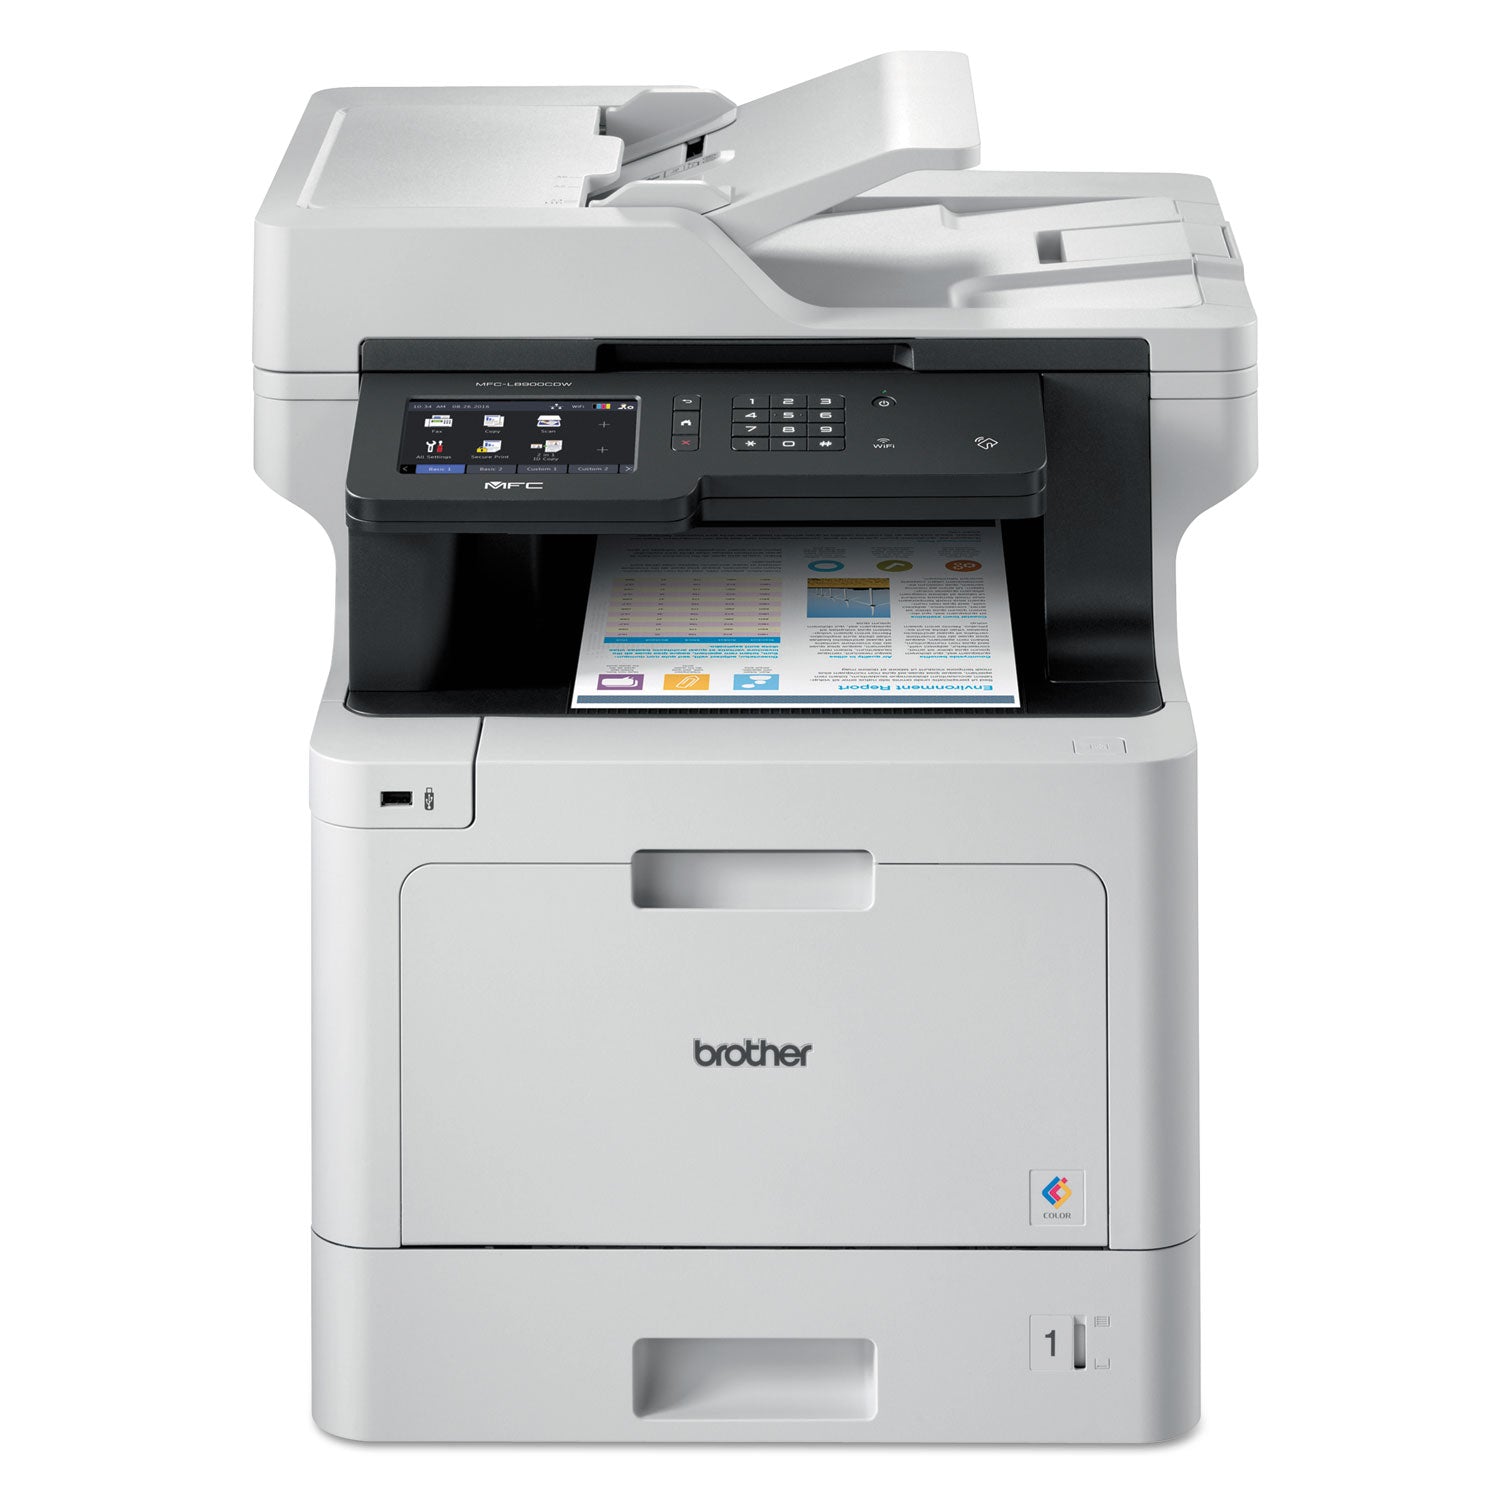 mfcl8900cdw-business-color-laser-all-in-one-printer-with-duplex-print-scan-copy-and-wireless-networking_brtmfcl8900cdw - 4